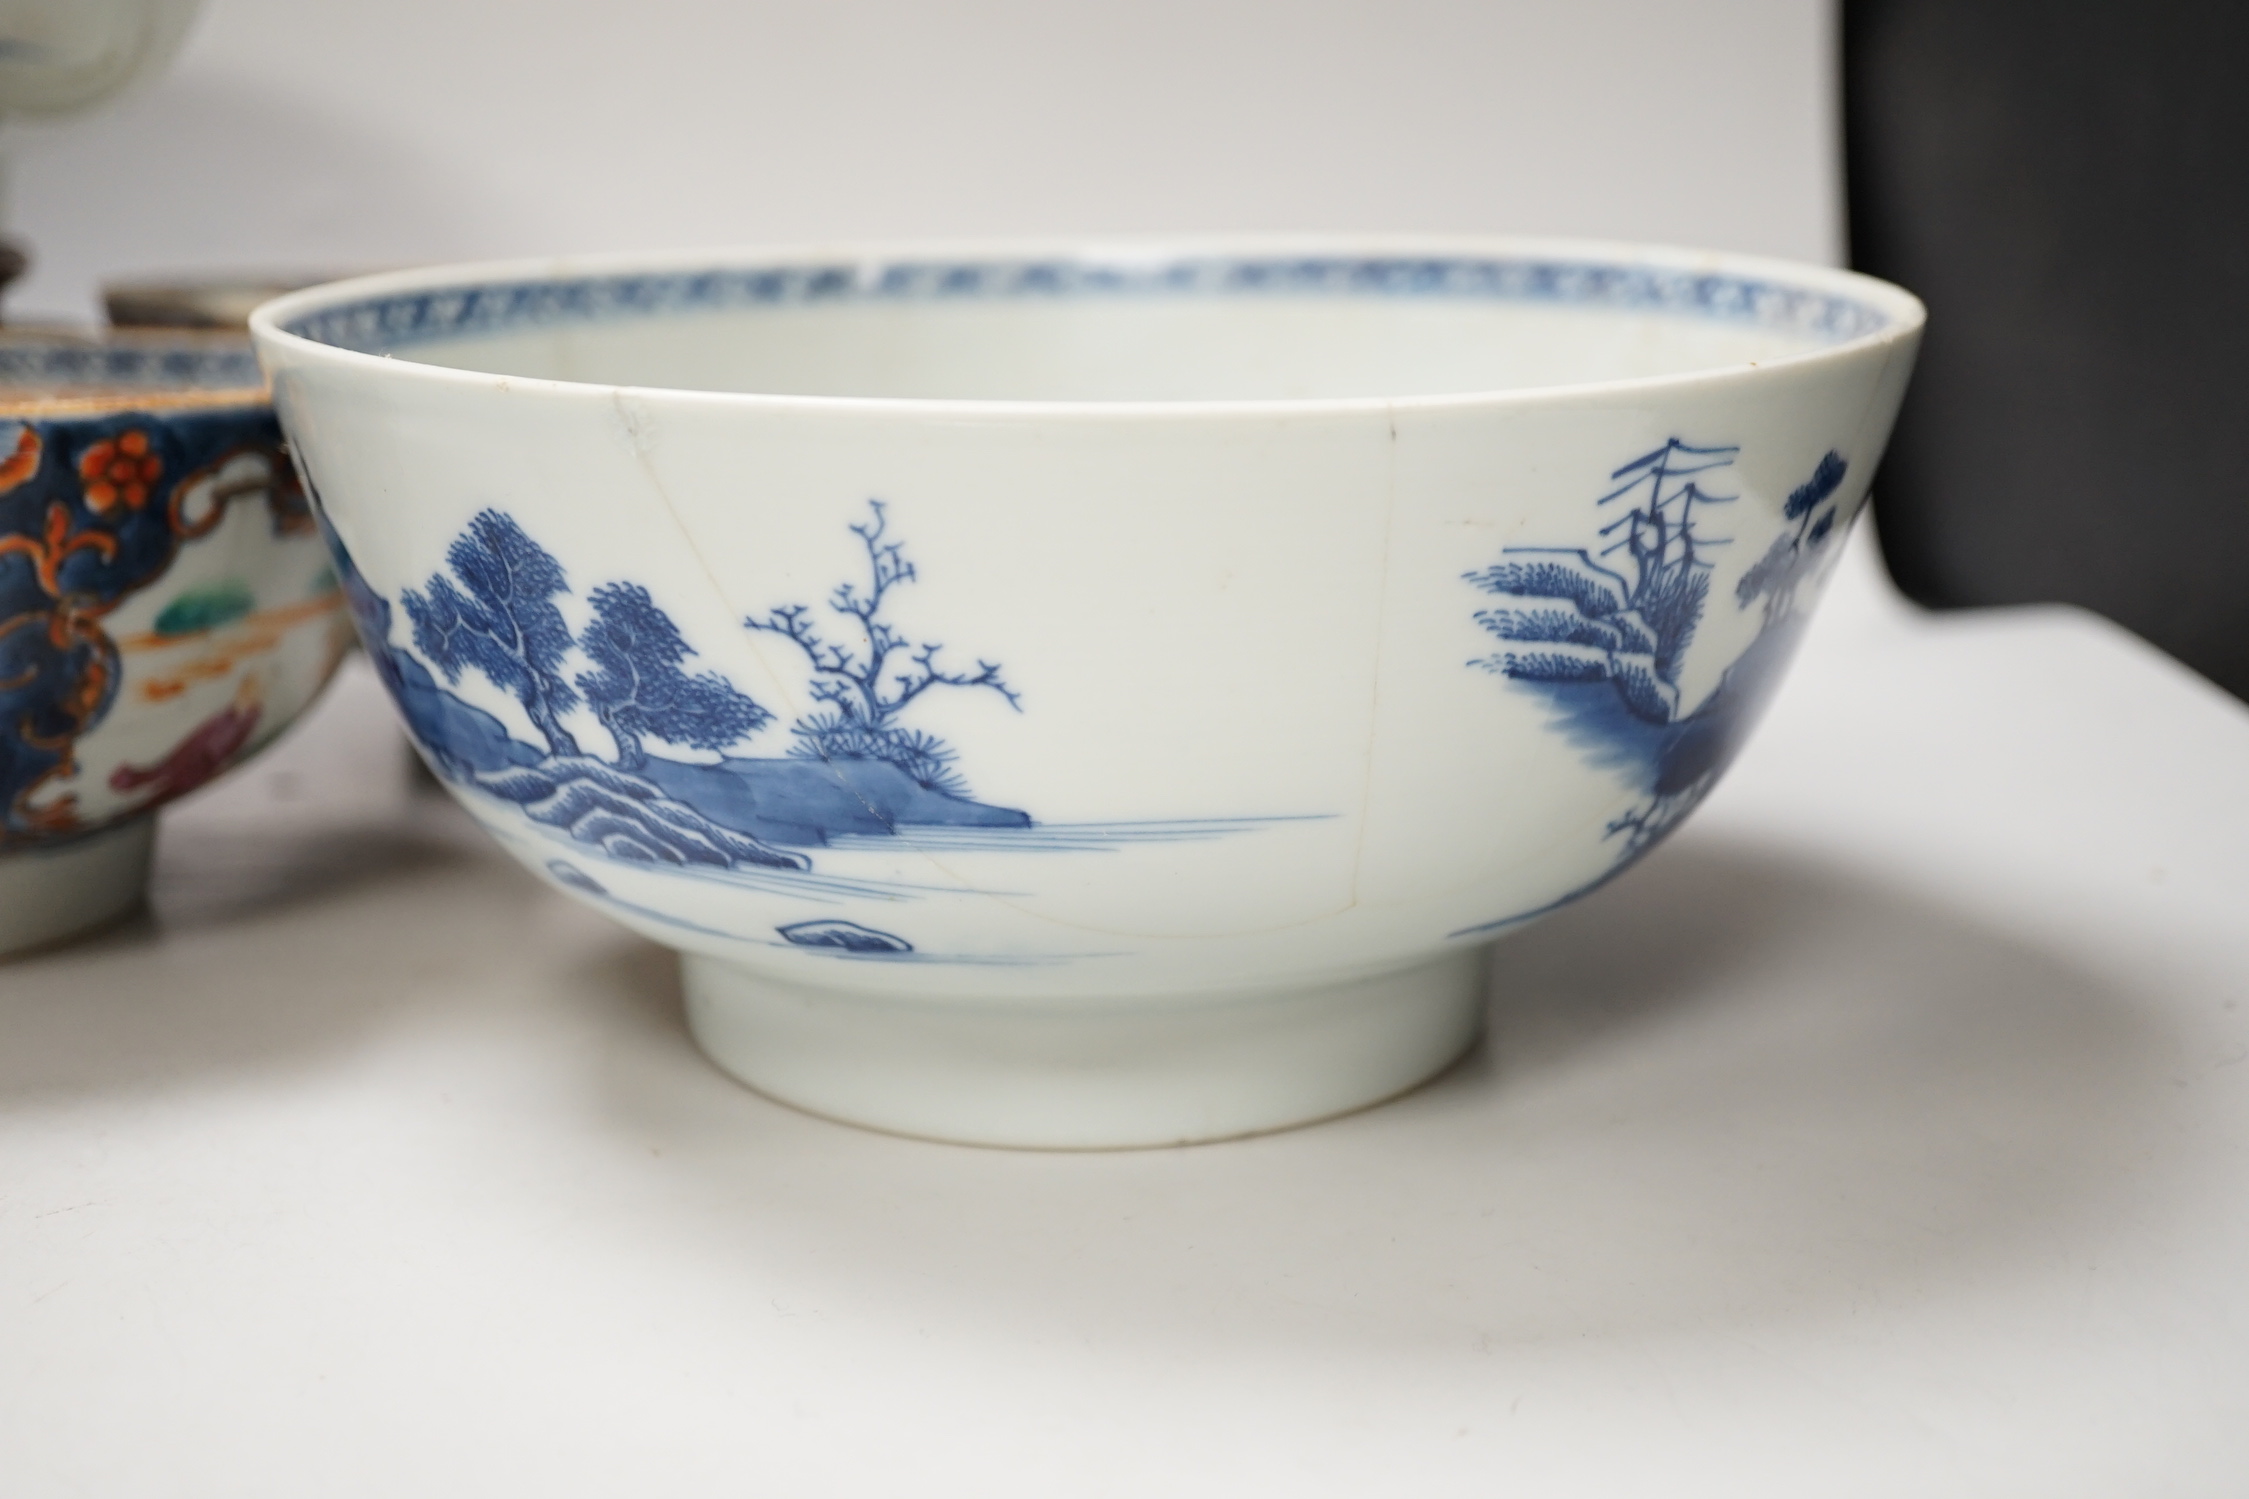 Four 18th century Chinese porcelain bowls (a.f), one with hardwood stand, largest 28cm diameter